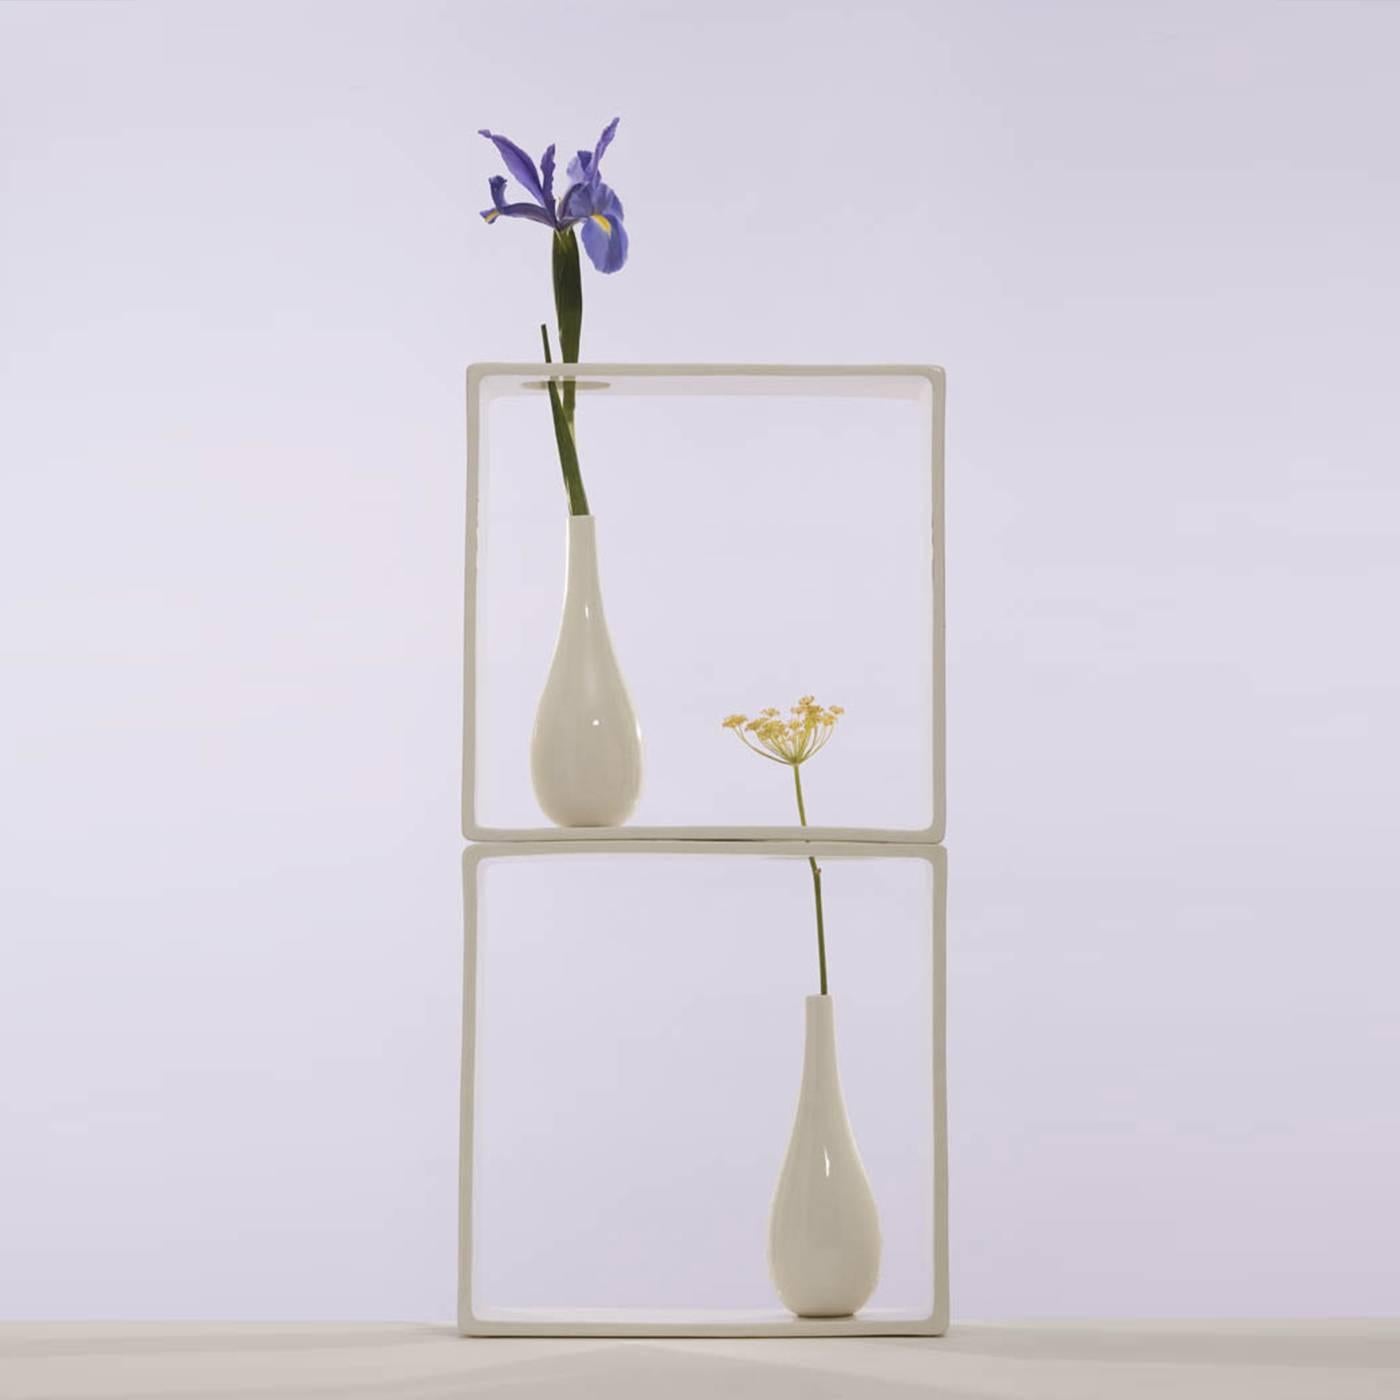 This striking vase is part of a collection of 18 designs by Andrea Branzi that created a garden of micro-environments enclosed in square elements all made in white ceramic. This one is particularly unique, since it features a hole at the bottom and